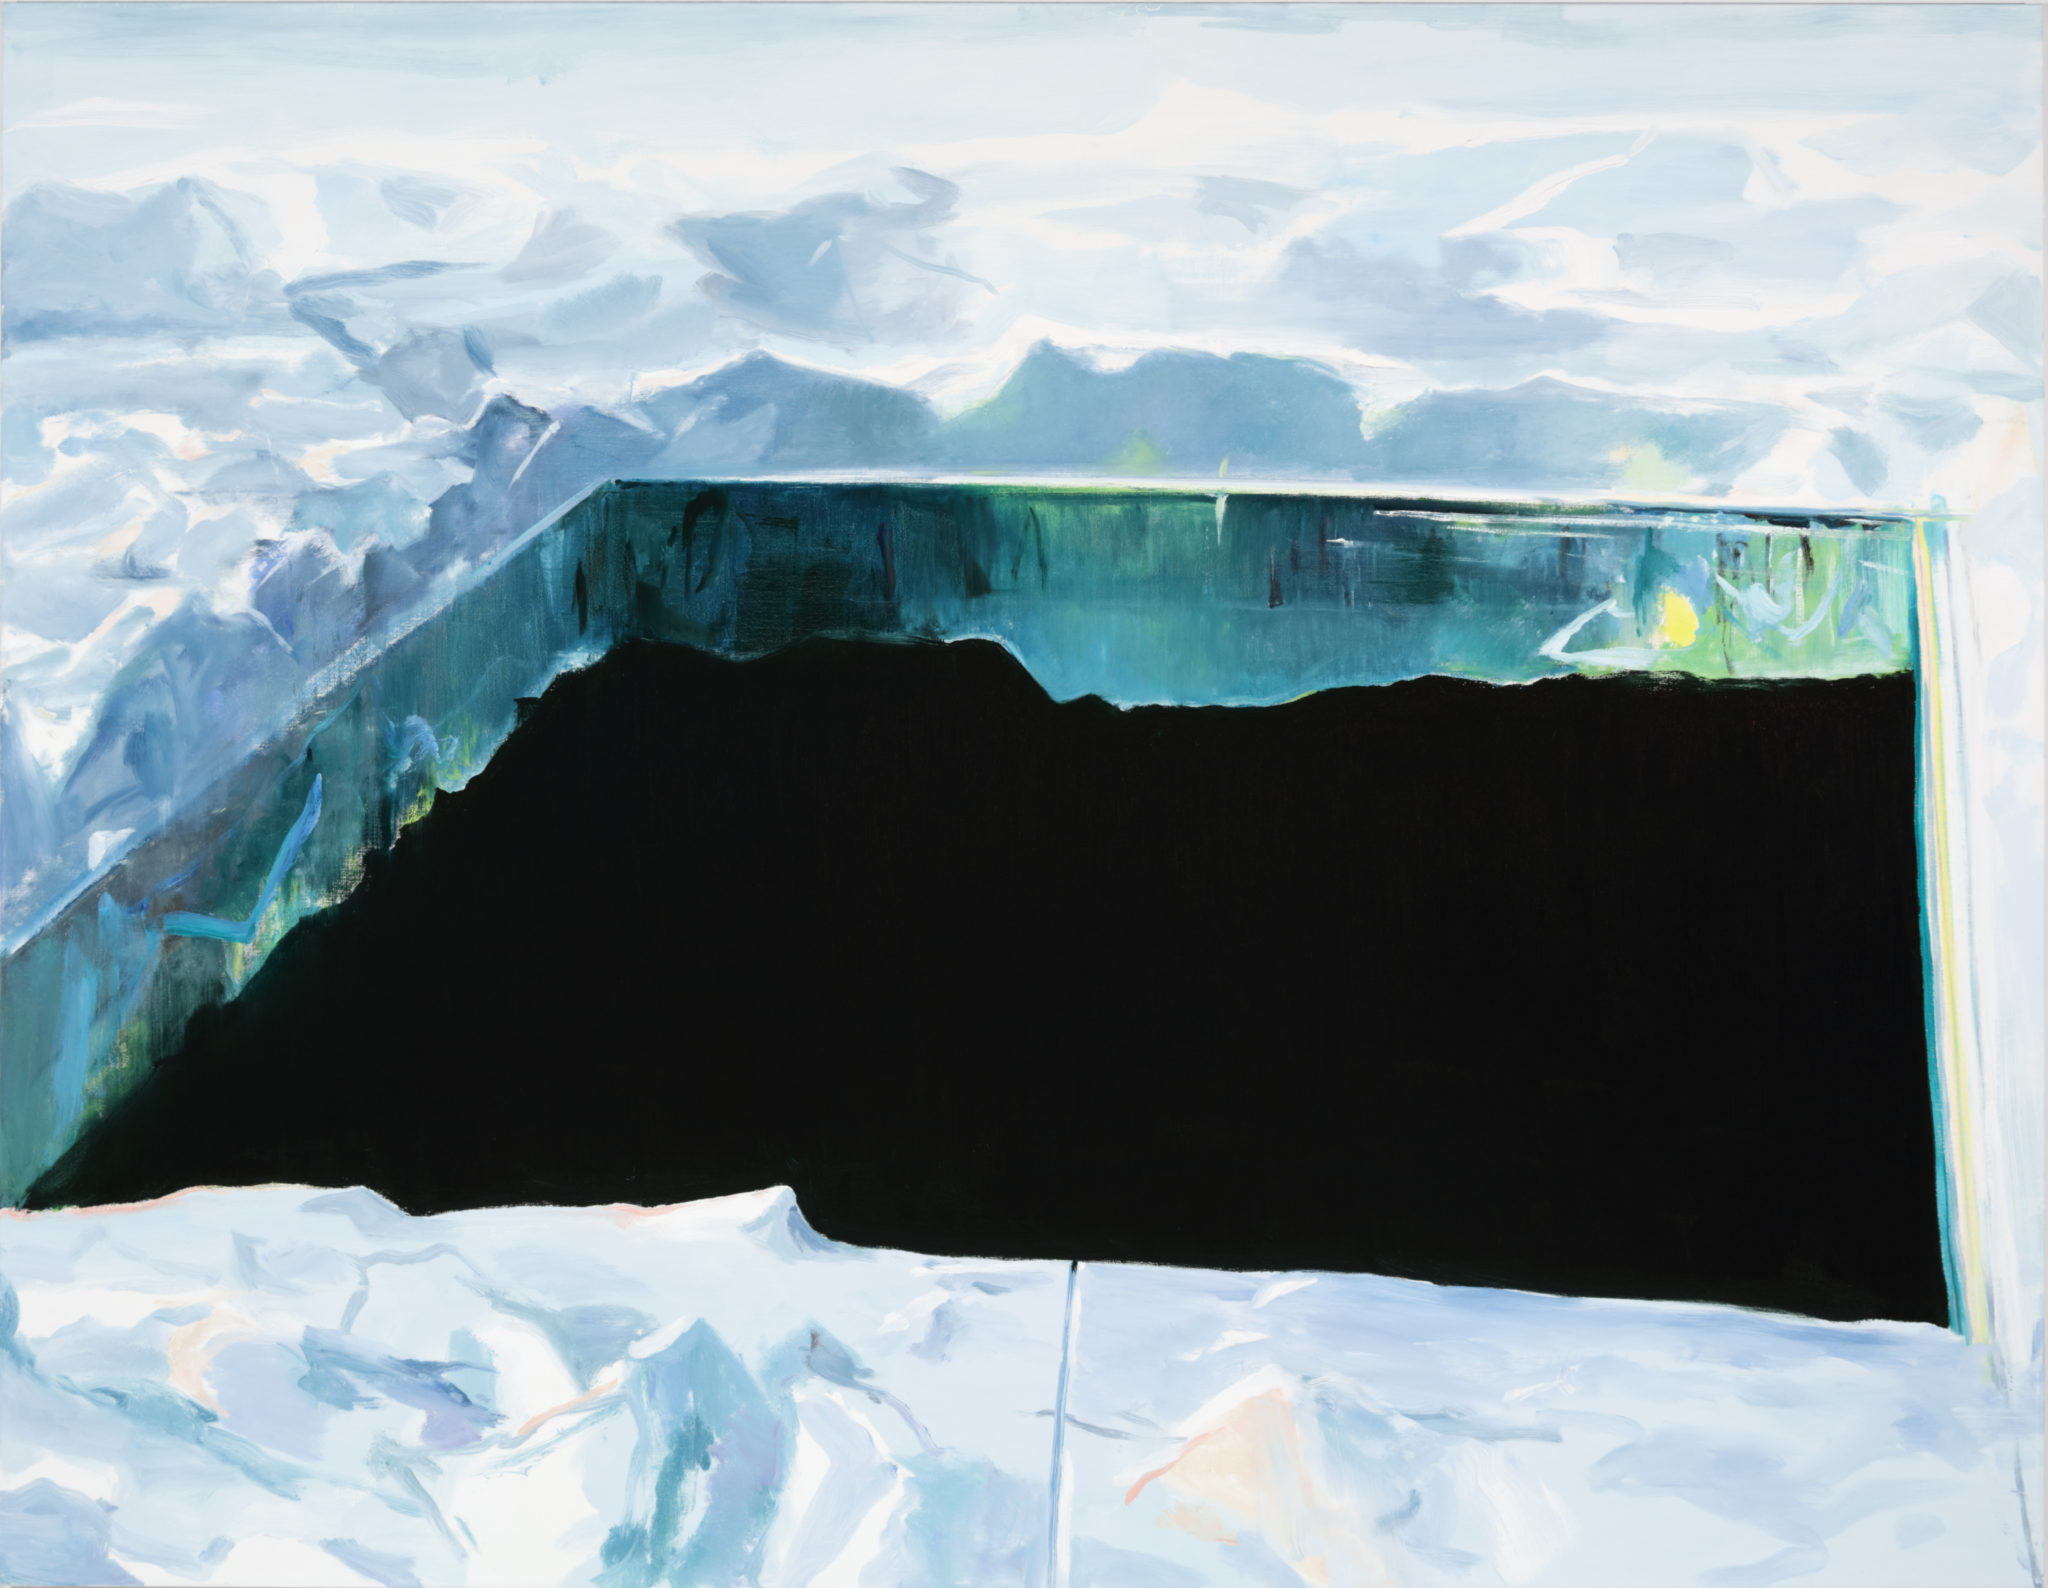 Eric Aho. Ice Cut (1937), 2015. Oil on linen. 74 x 95½ inches.